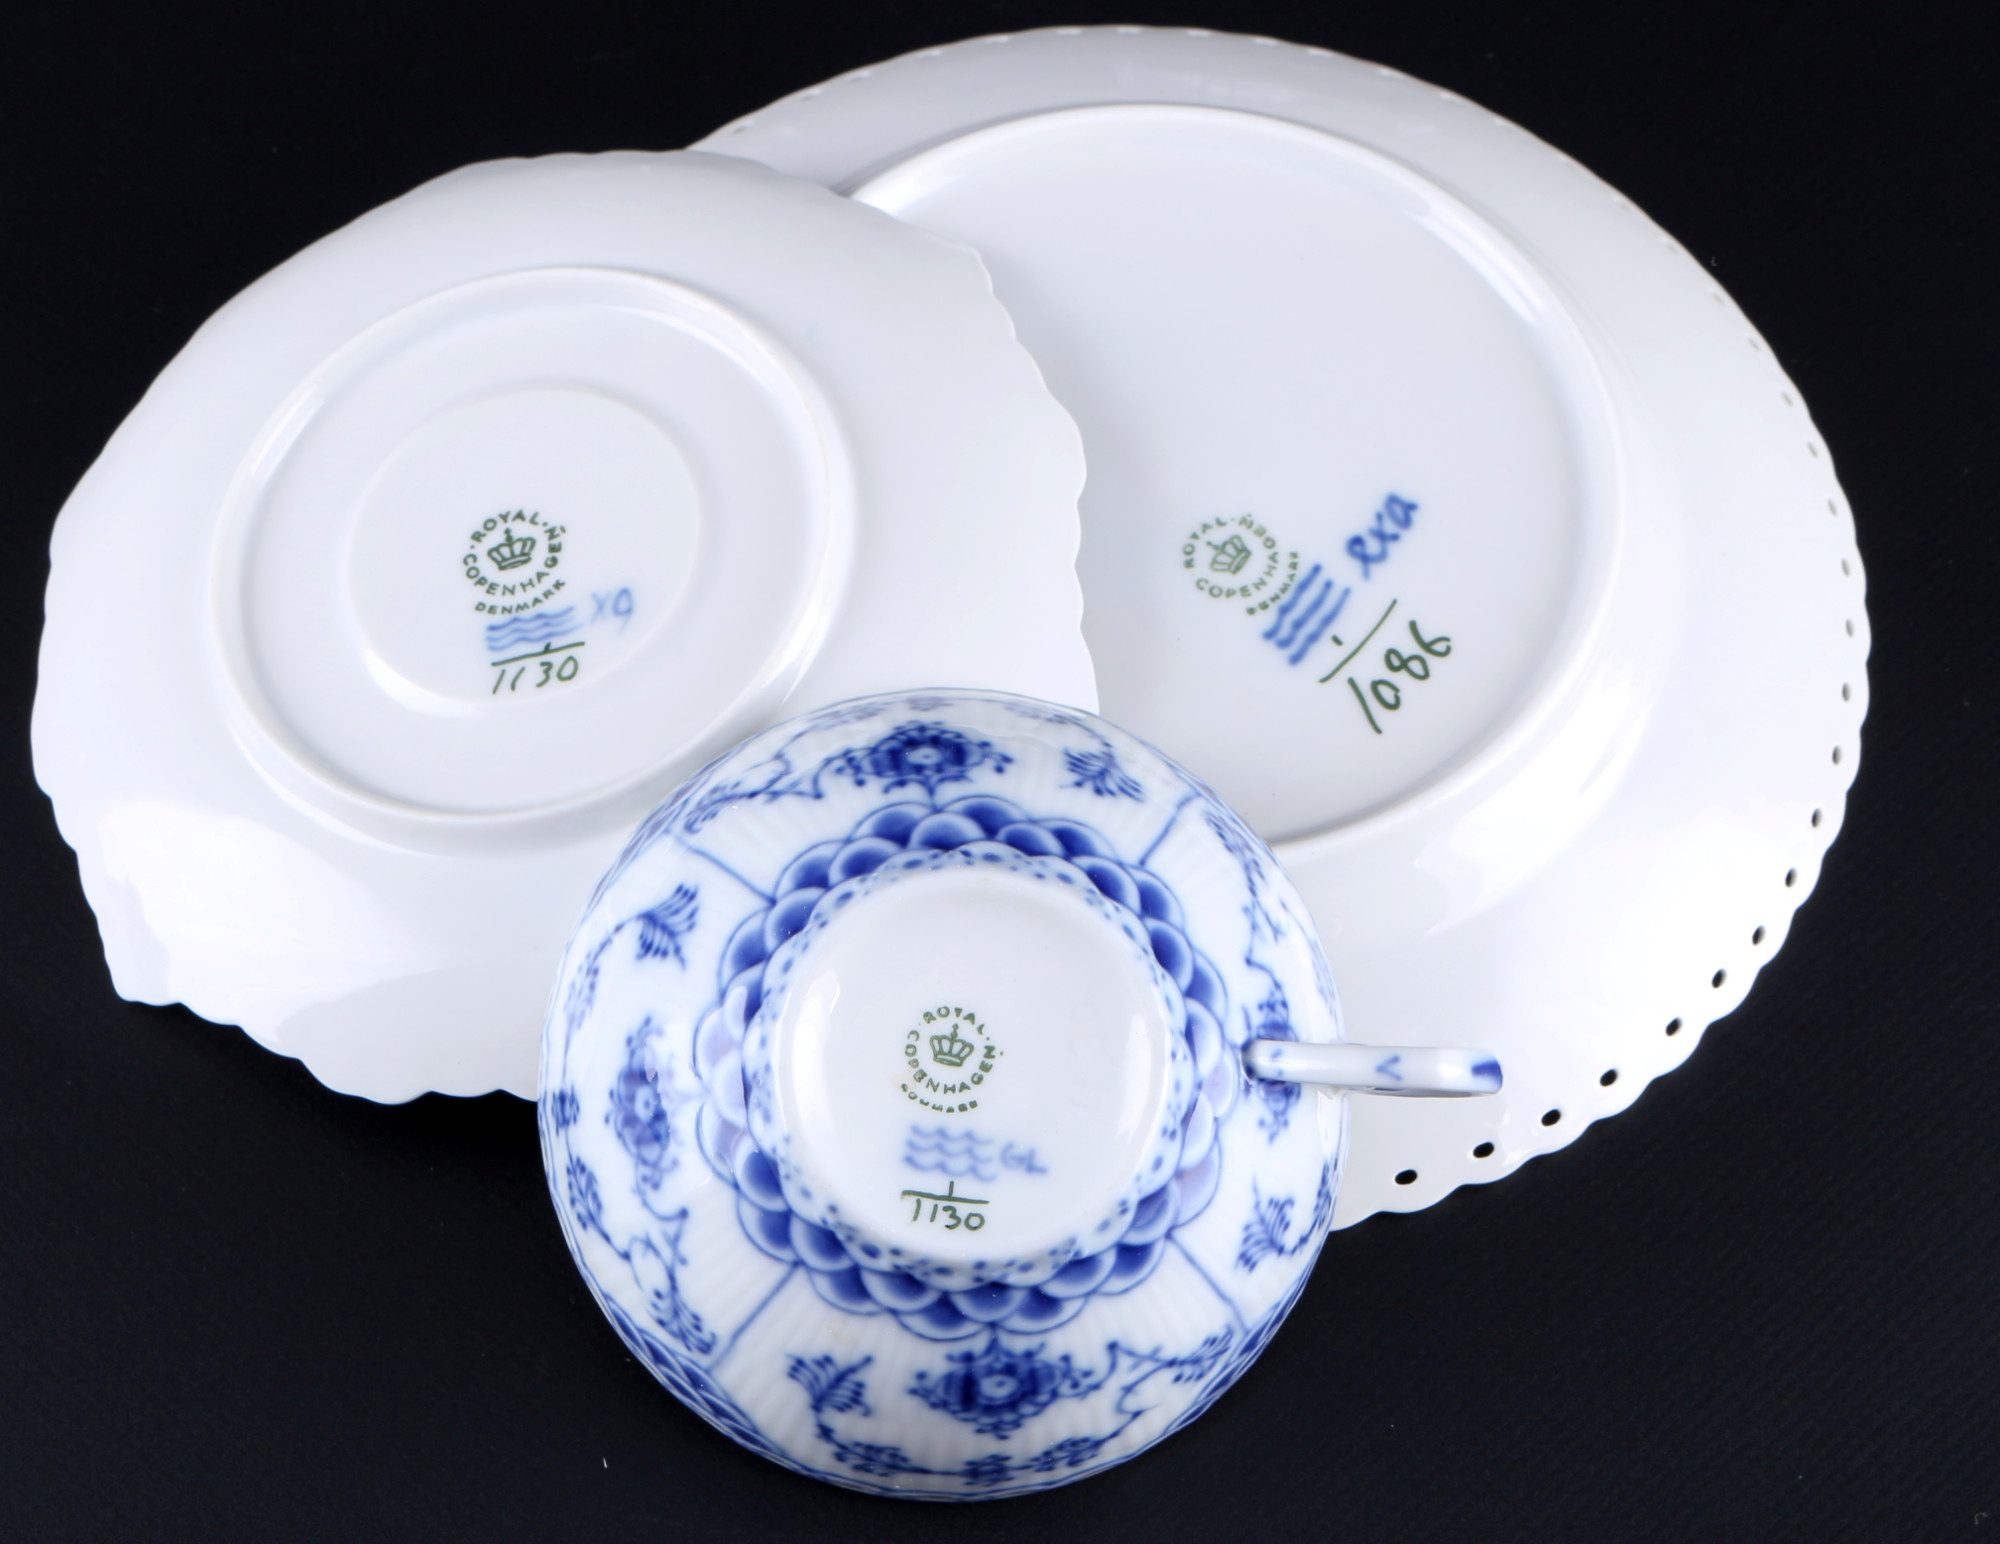 Royal Copenhagen Musselmalet Full Lace 4 tea cups with dessert plates 1130/1086 1st choice, Vollspi - Image 3 of 3